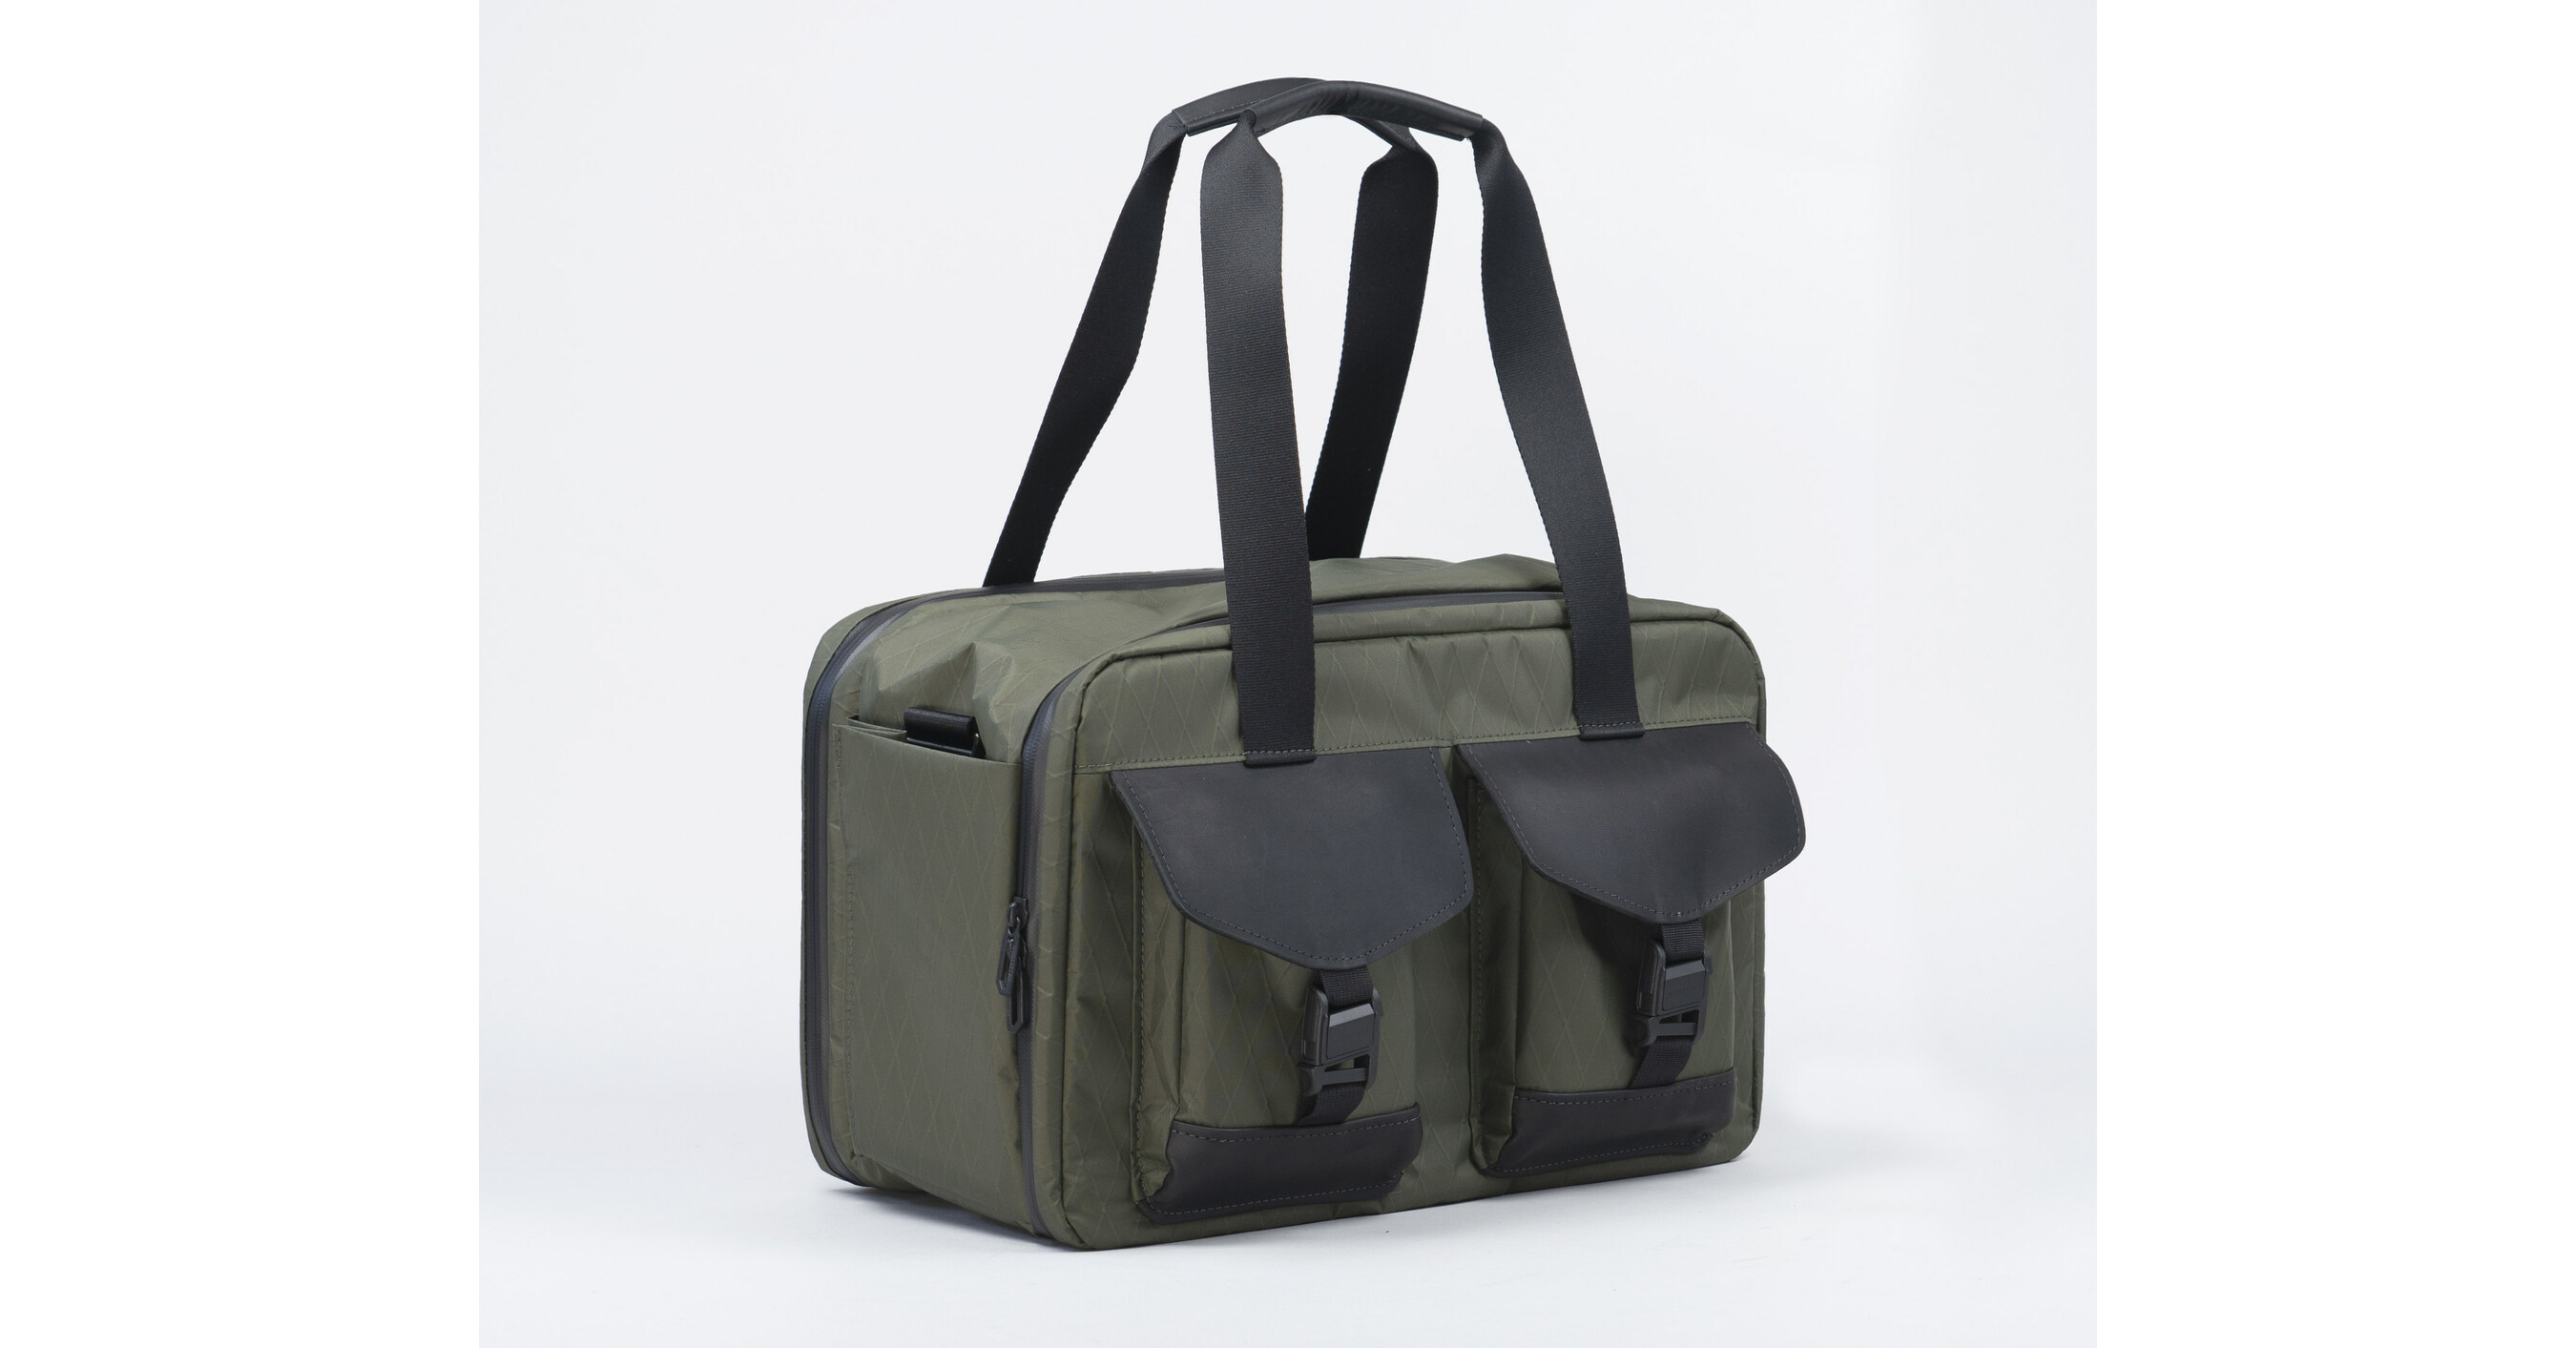 Outback Traveler Green Duffle Bag - Canvas Construction, Soft Lining,  Spacious Interior, Leather Accents, Multiple Pockets, Metal Hardware